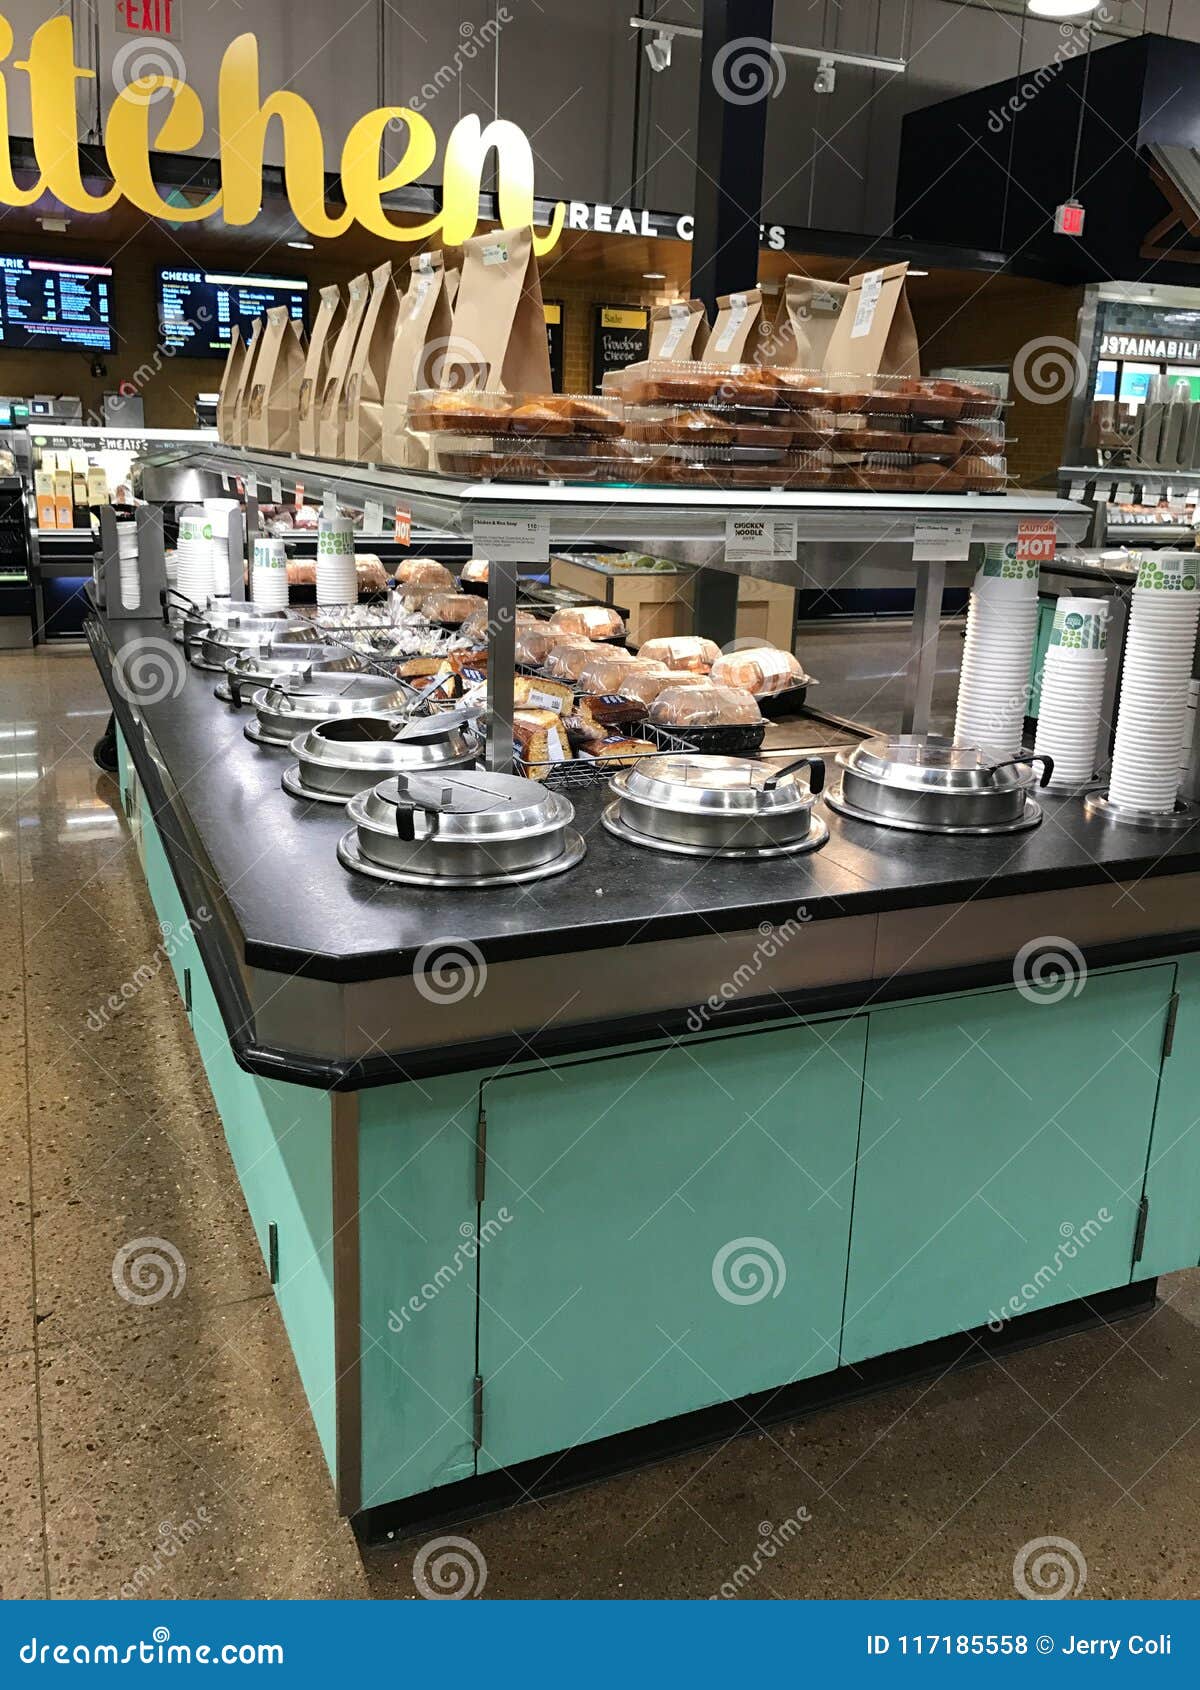 https://thumbs.dreamstime.com/z/whole-foods-grocery-store-located-legacy-place-dedham-ma-kitchen-where-shoppers-can-purchase-hot-prepared-foods-whole-117185558.jpg